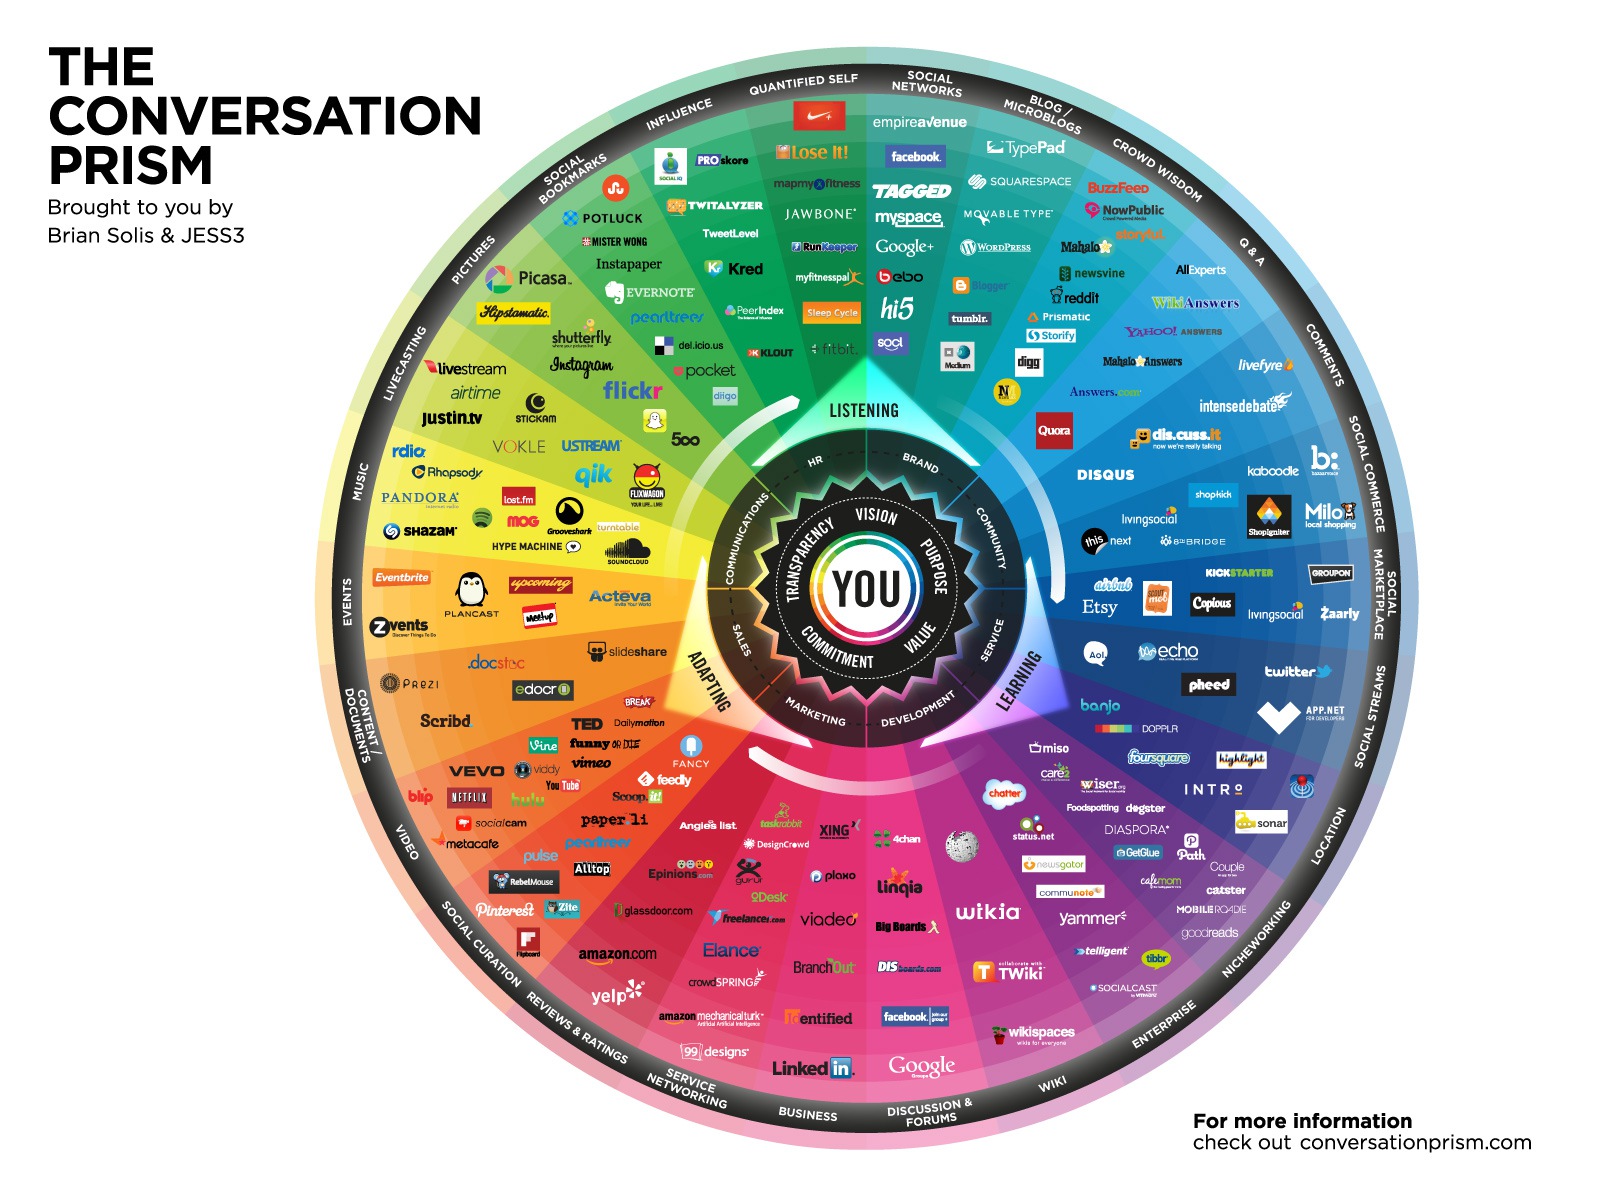 The Conversation Prism by Brian Solis